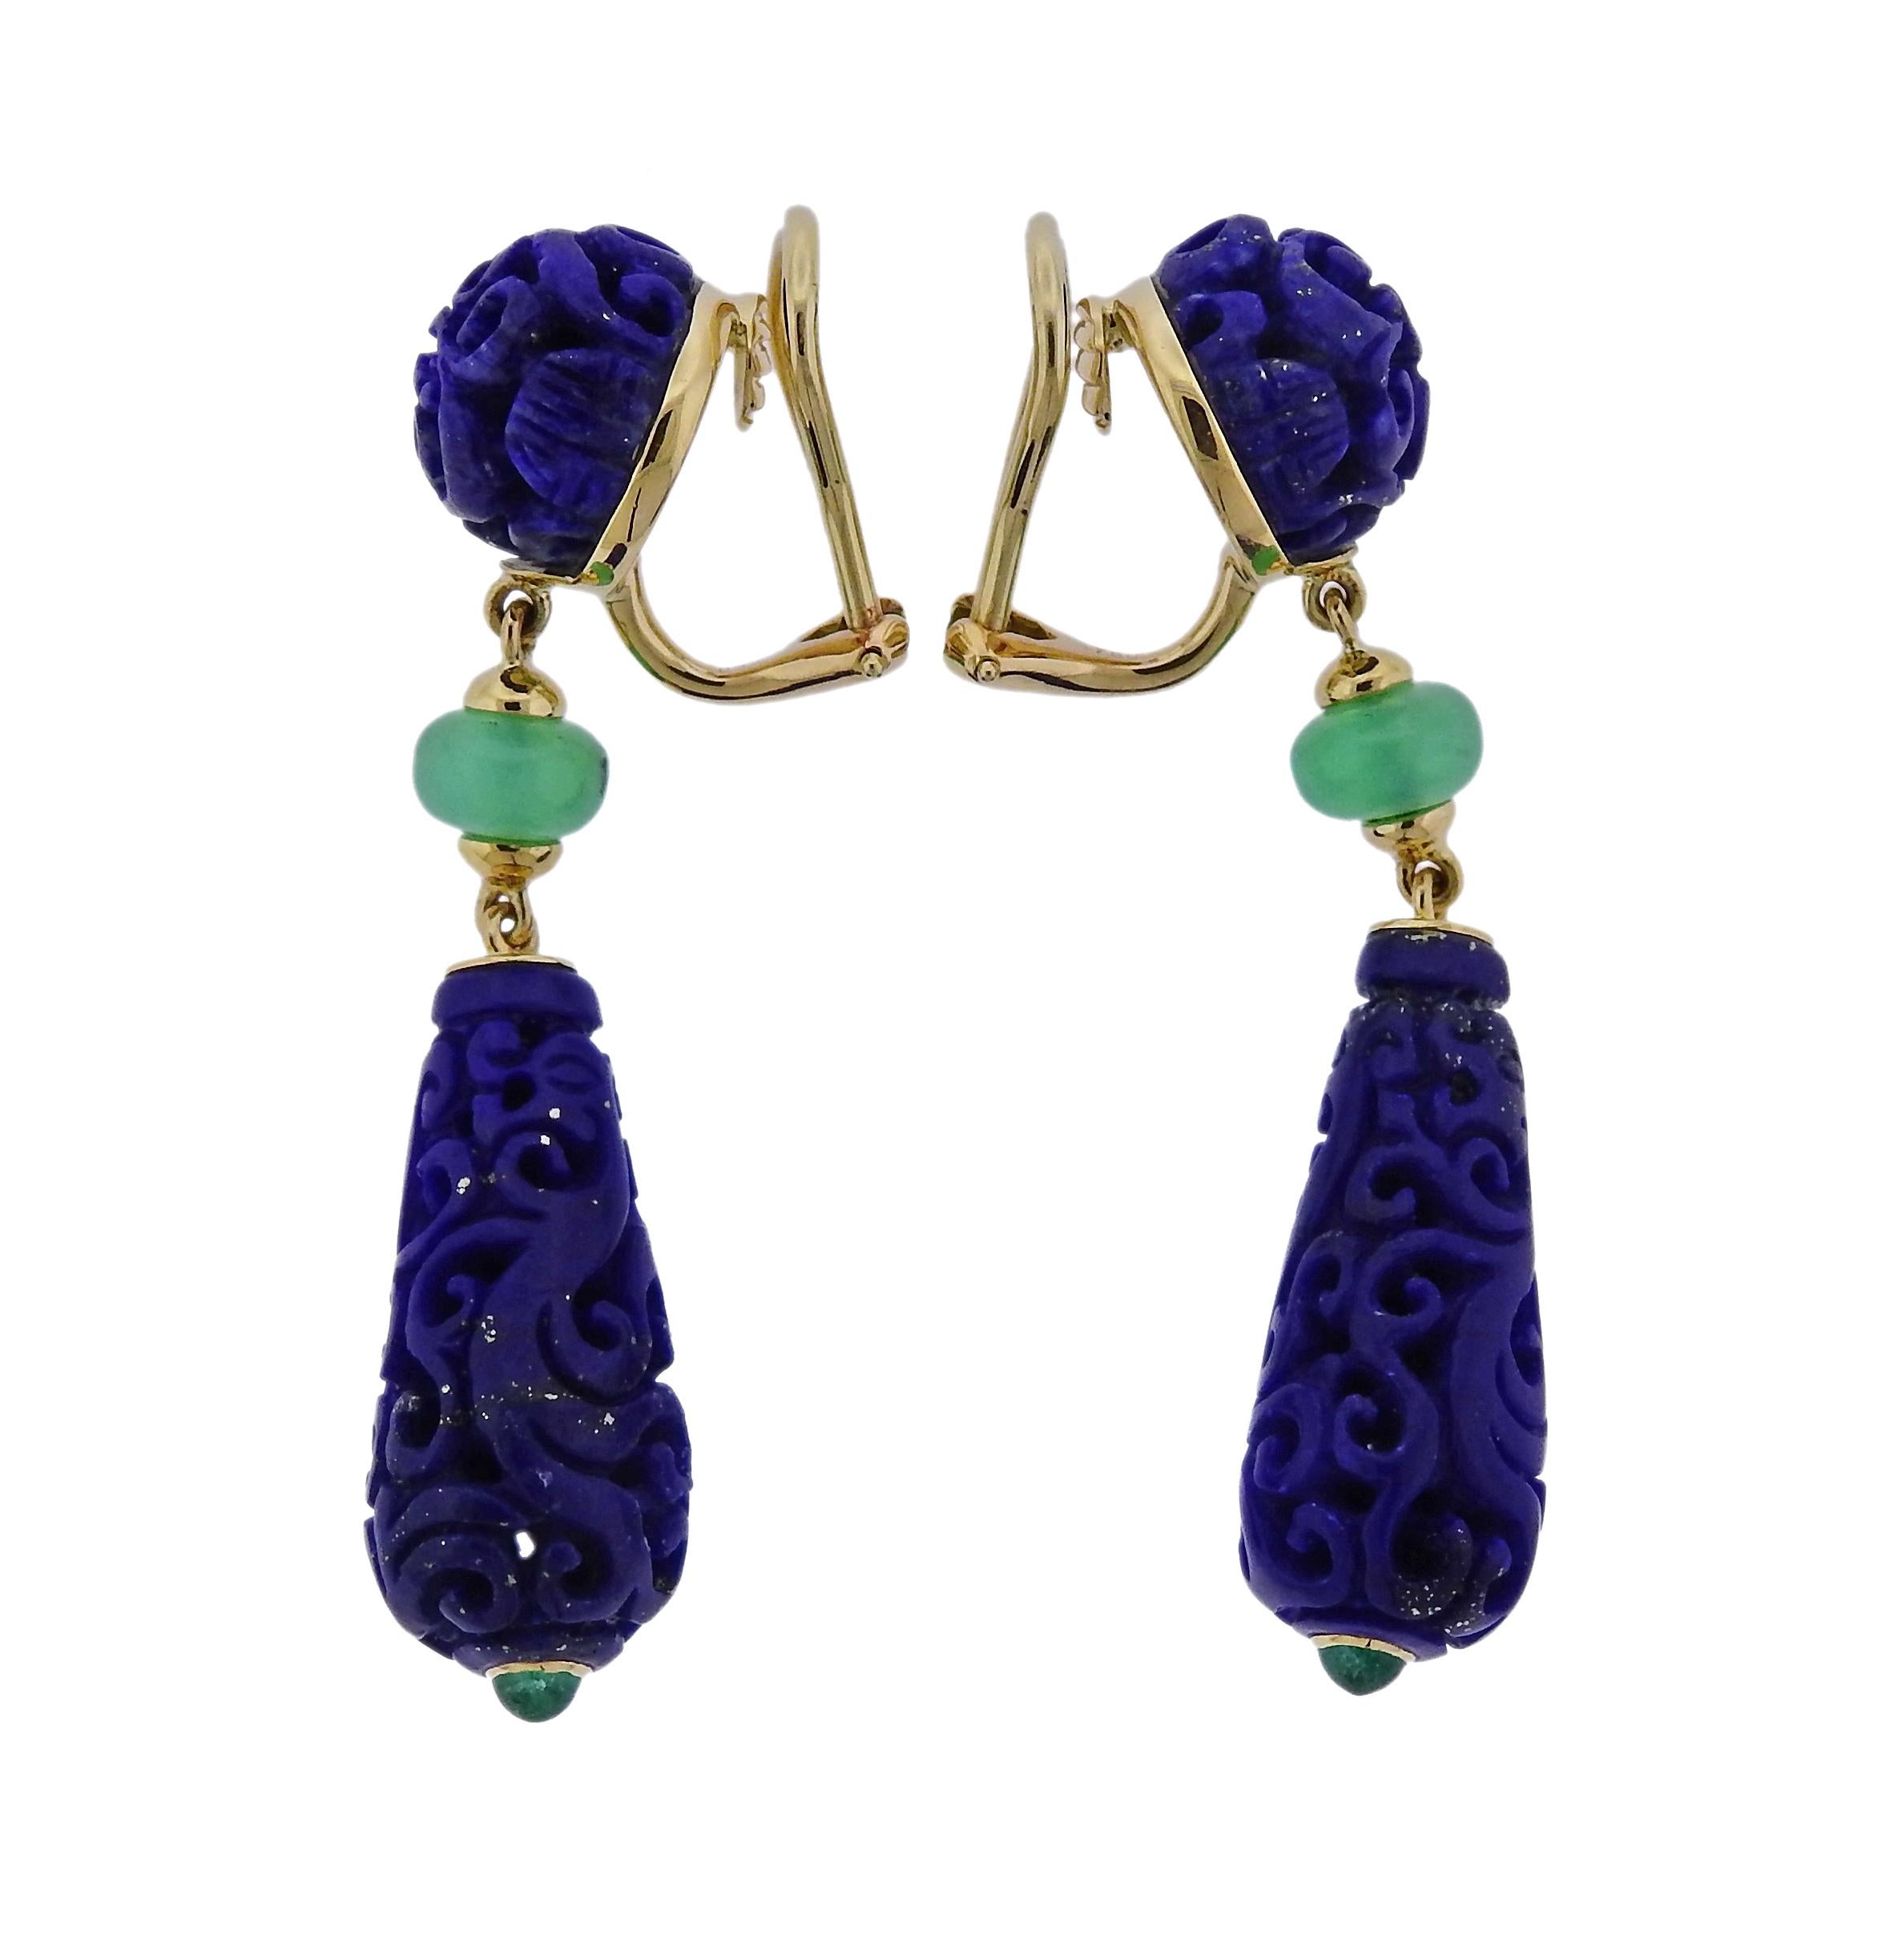 Pair of brand new 18k gold drop earrings by Seaman Schepps, created for Canton collection, set with carved lapis and chrysoprase.  Earrings are 49mm x 11mm, weigh 13 grams. Marked: 243788, 750, Shell hallmark. 